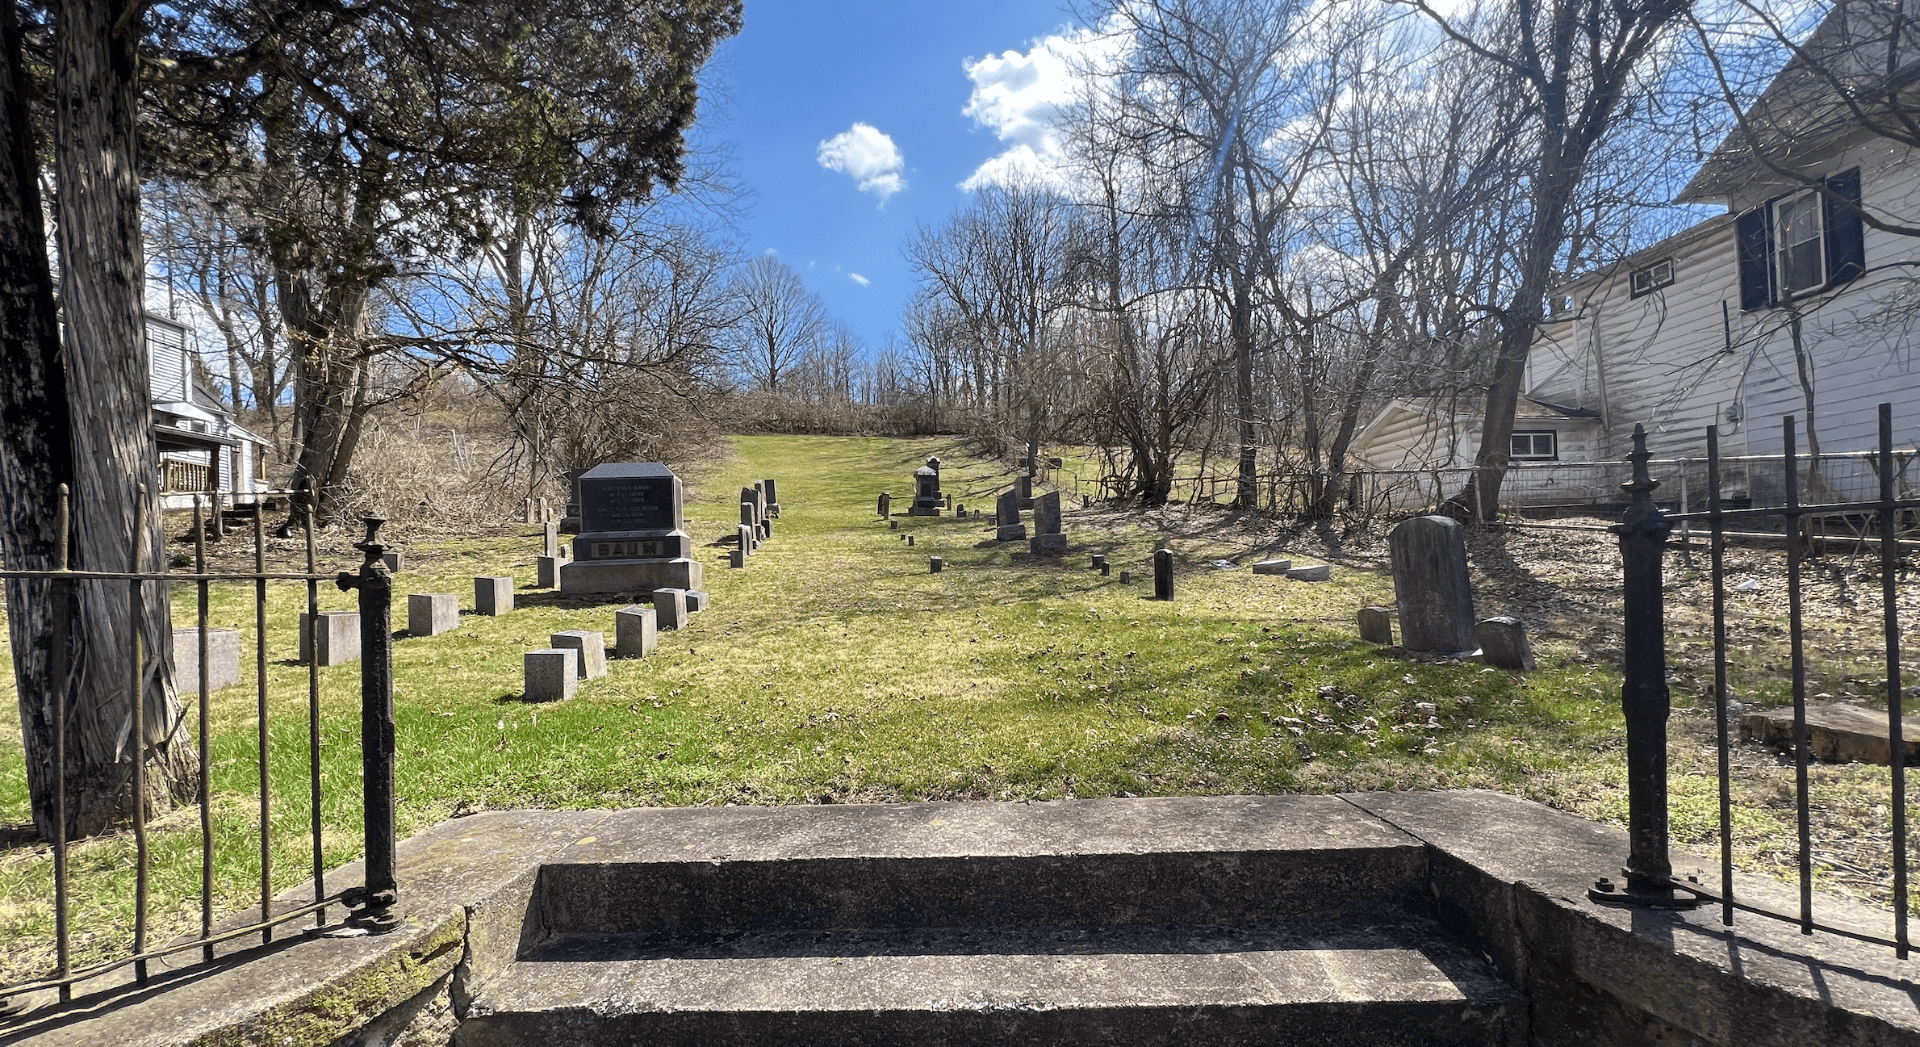 Entrance to the Rodef Shalom Cemetery showing two steps in the bottom center